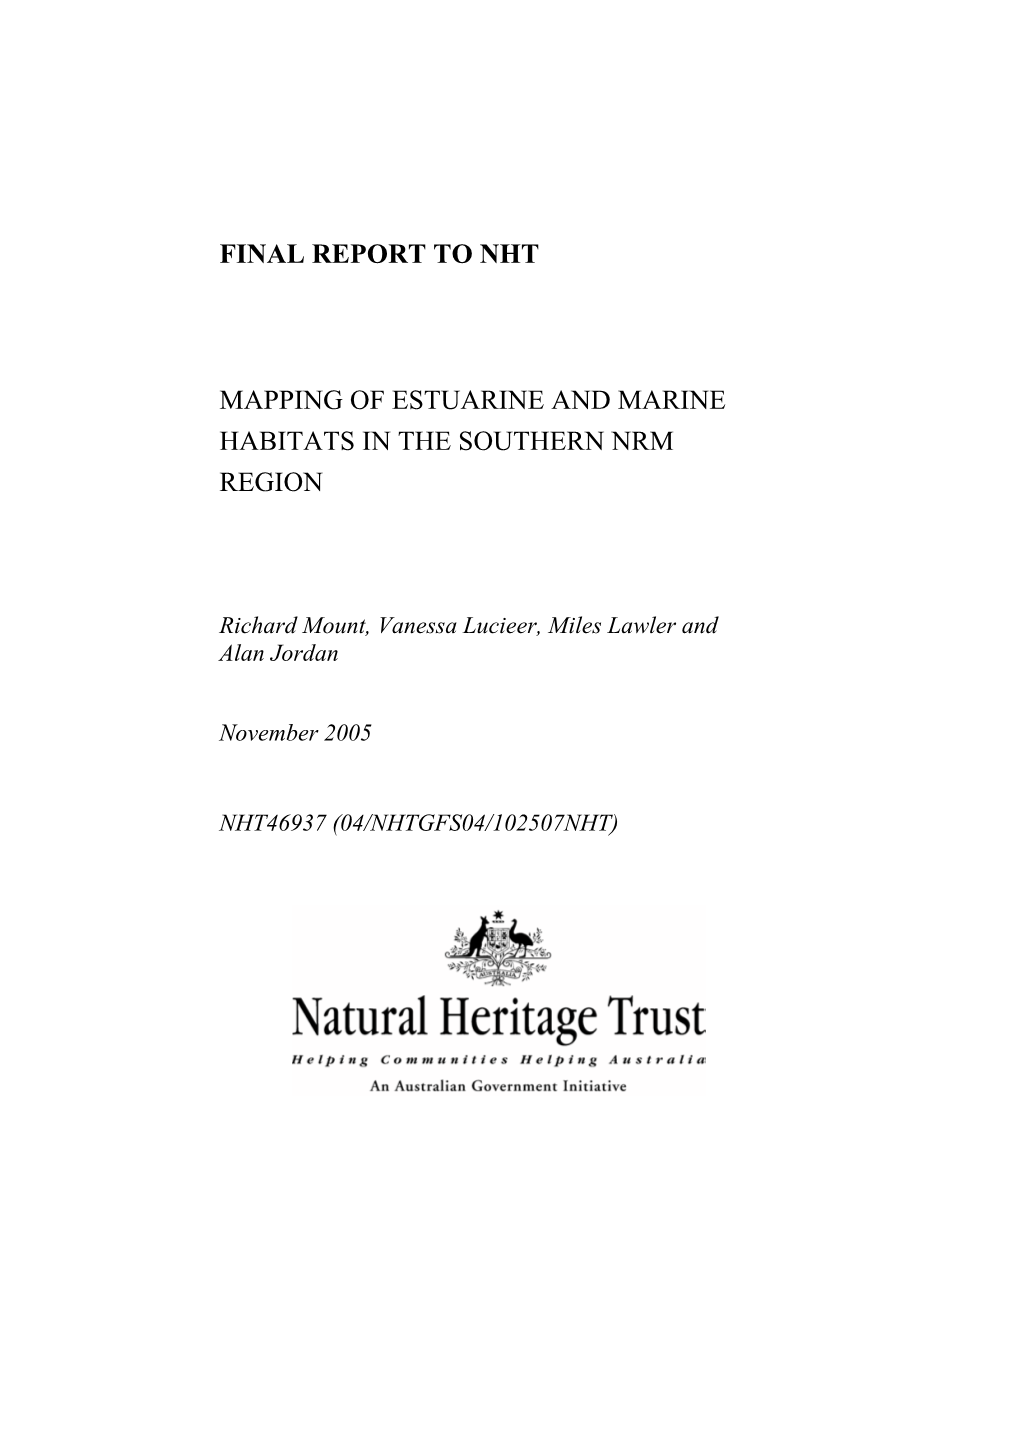 Mapping of Esturaine and Marine Habitats in the Southern NRM Region